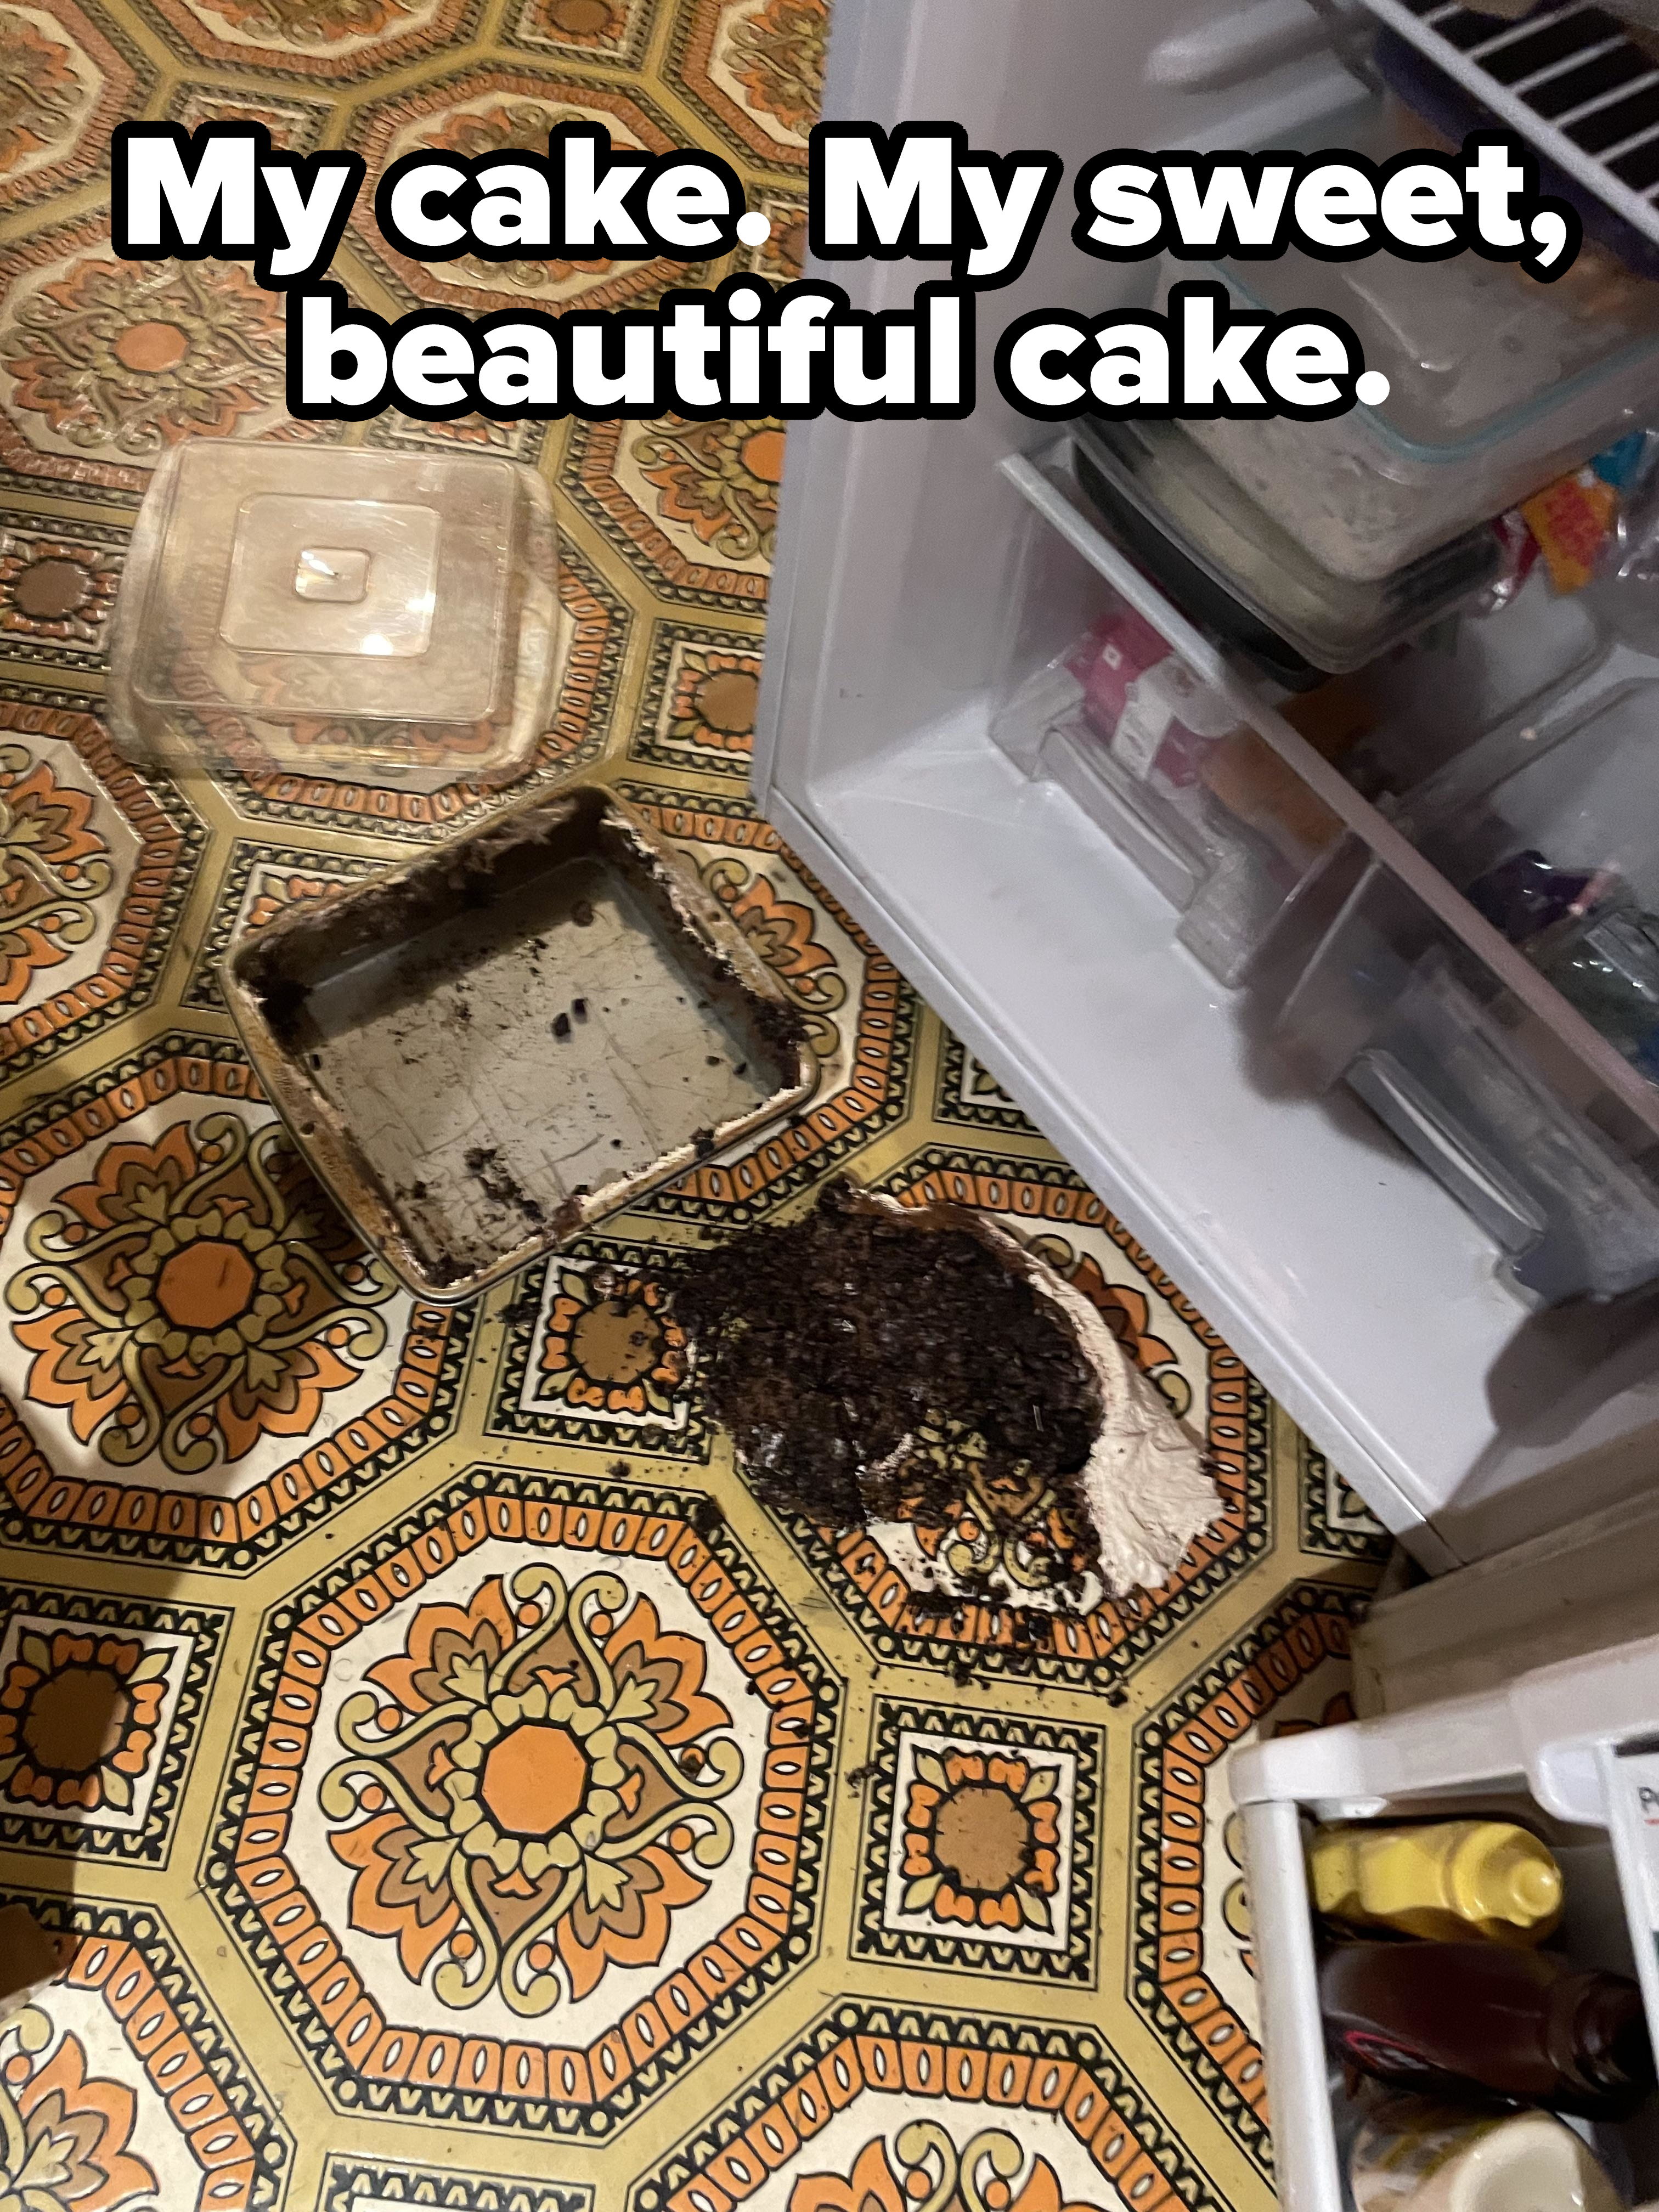 Overturned cake pan with cake scattered on a patterned floor, next to an open cabinet with items inside